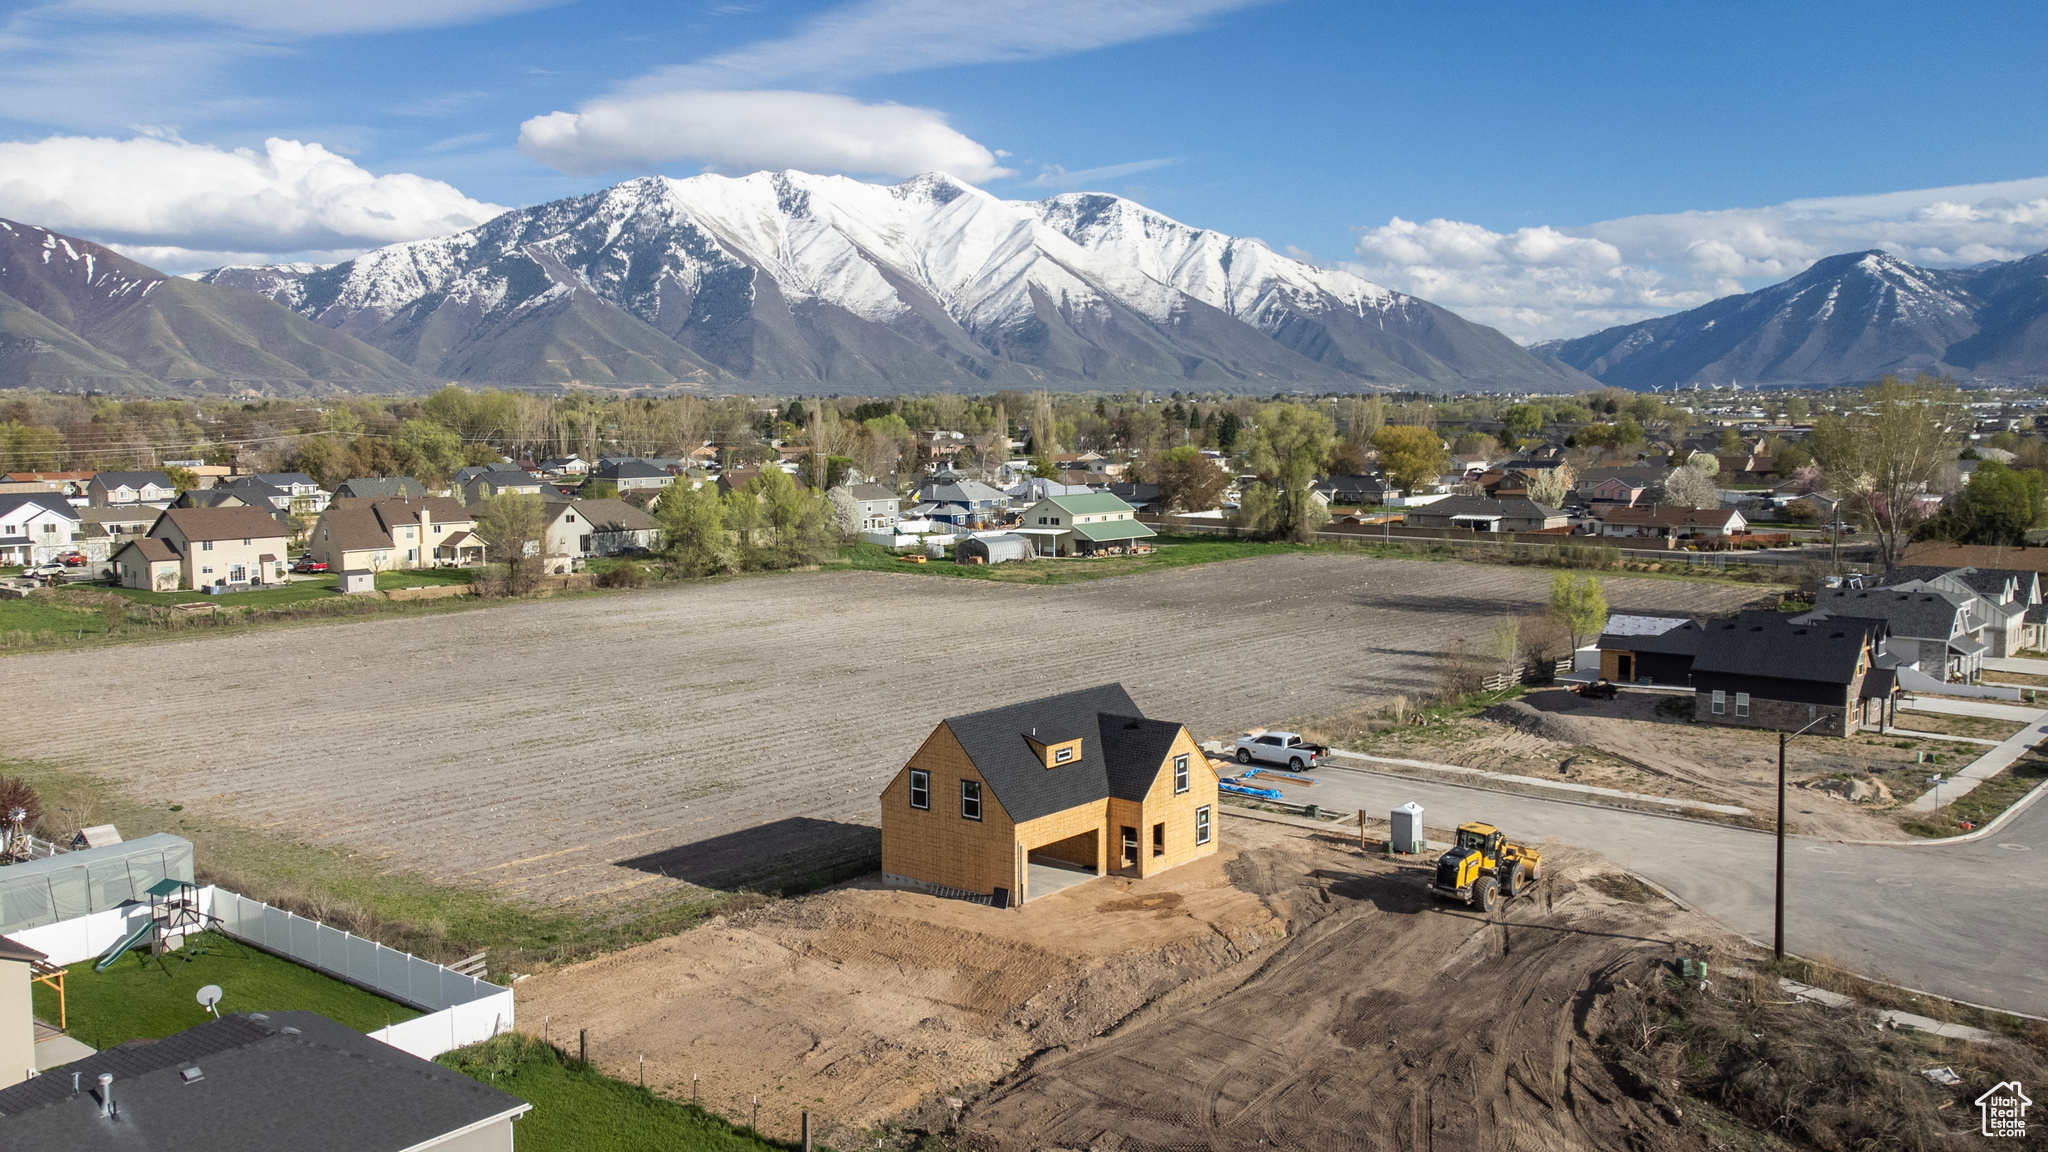 Birds eye view of property and panoramic mountain views